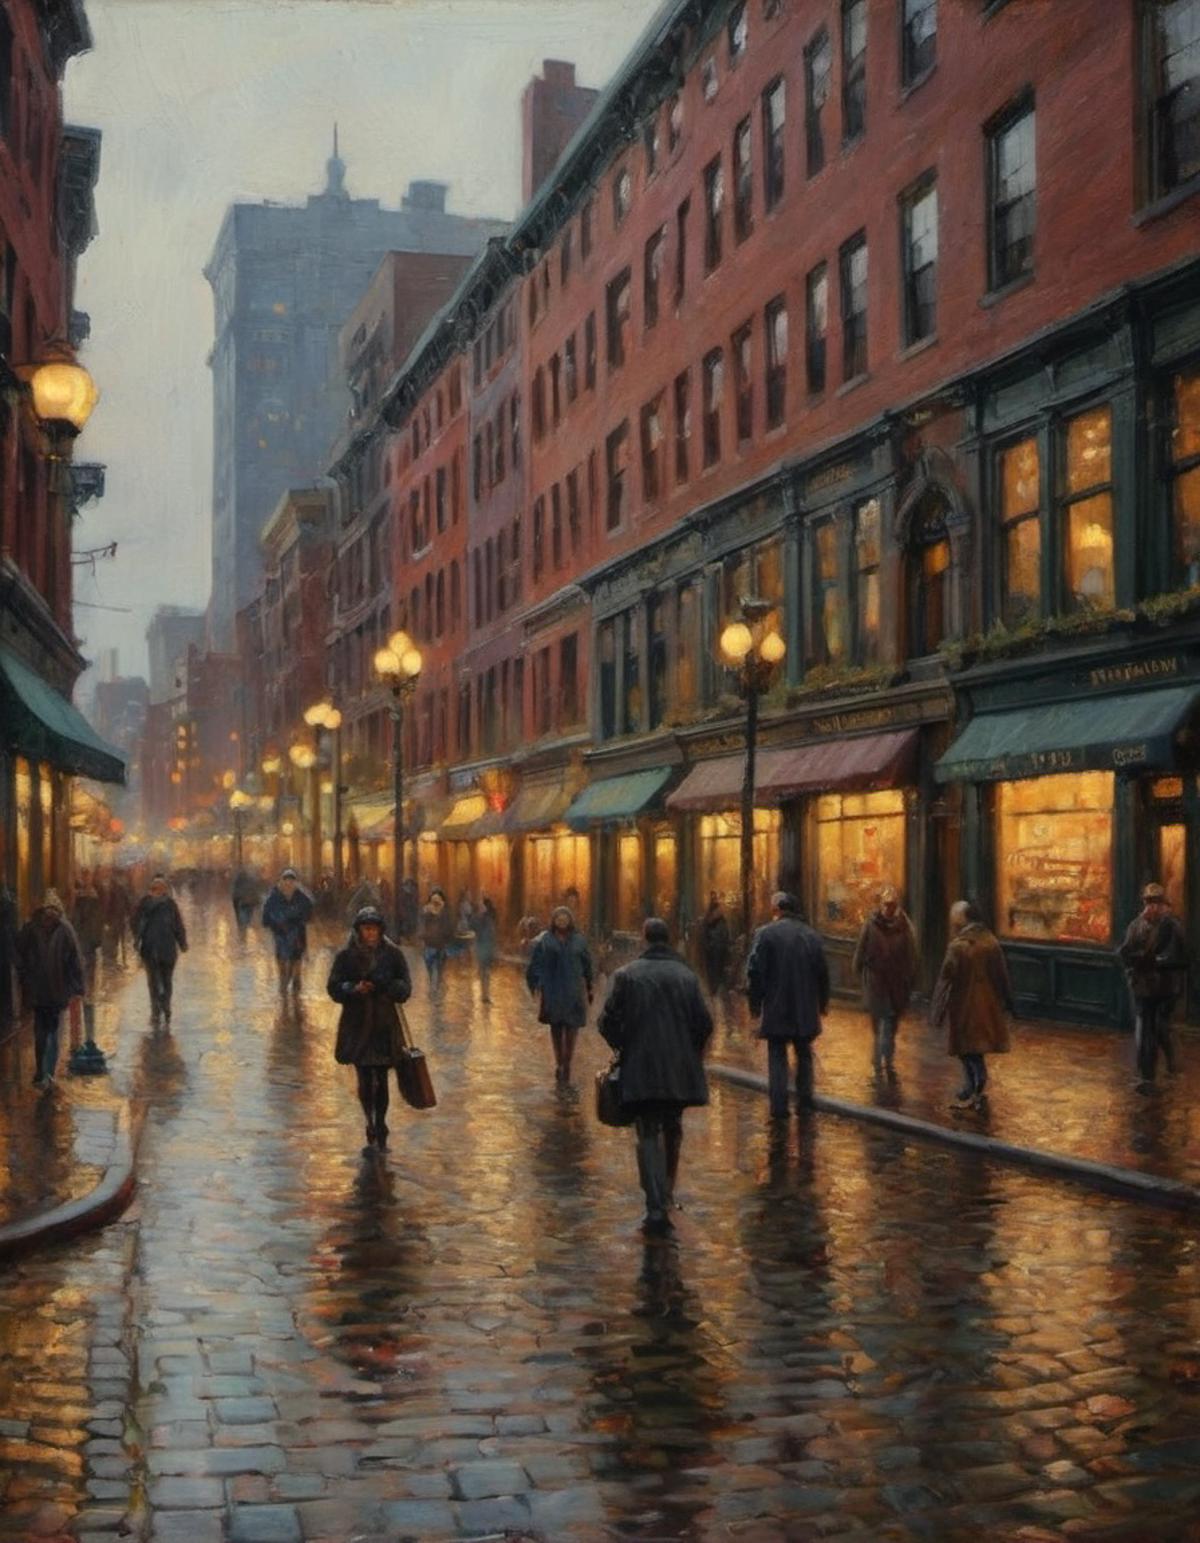 A Painting of a Rainy Night in a European City with People Walking and Lights on the Street.